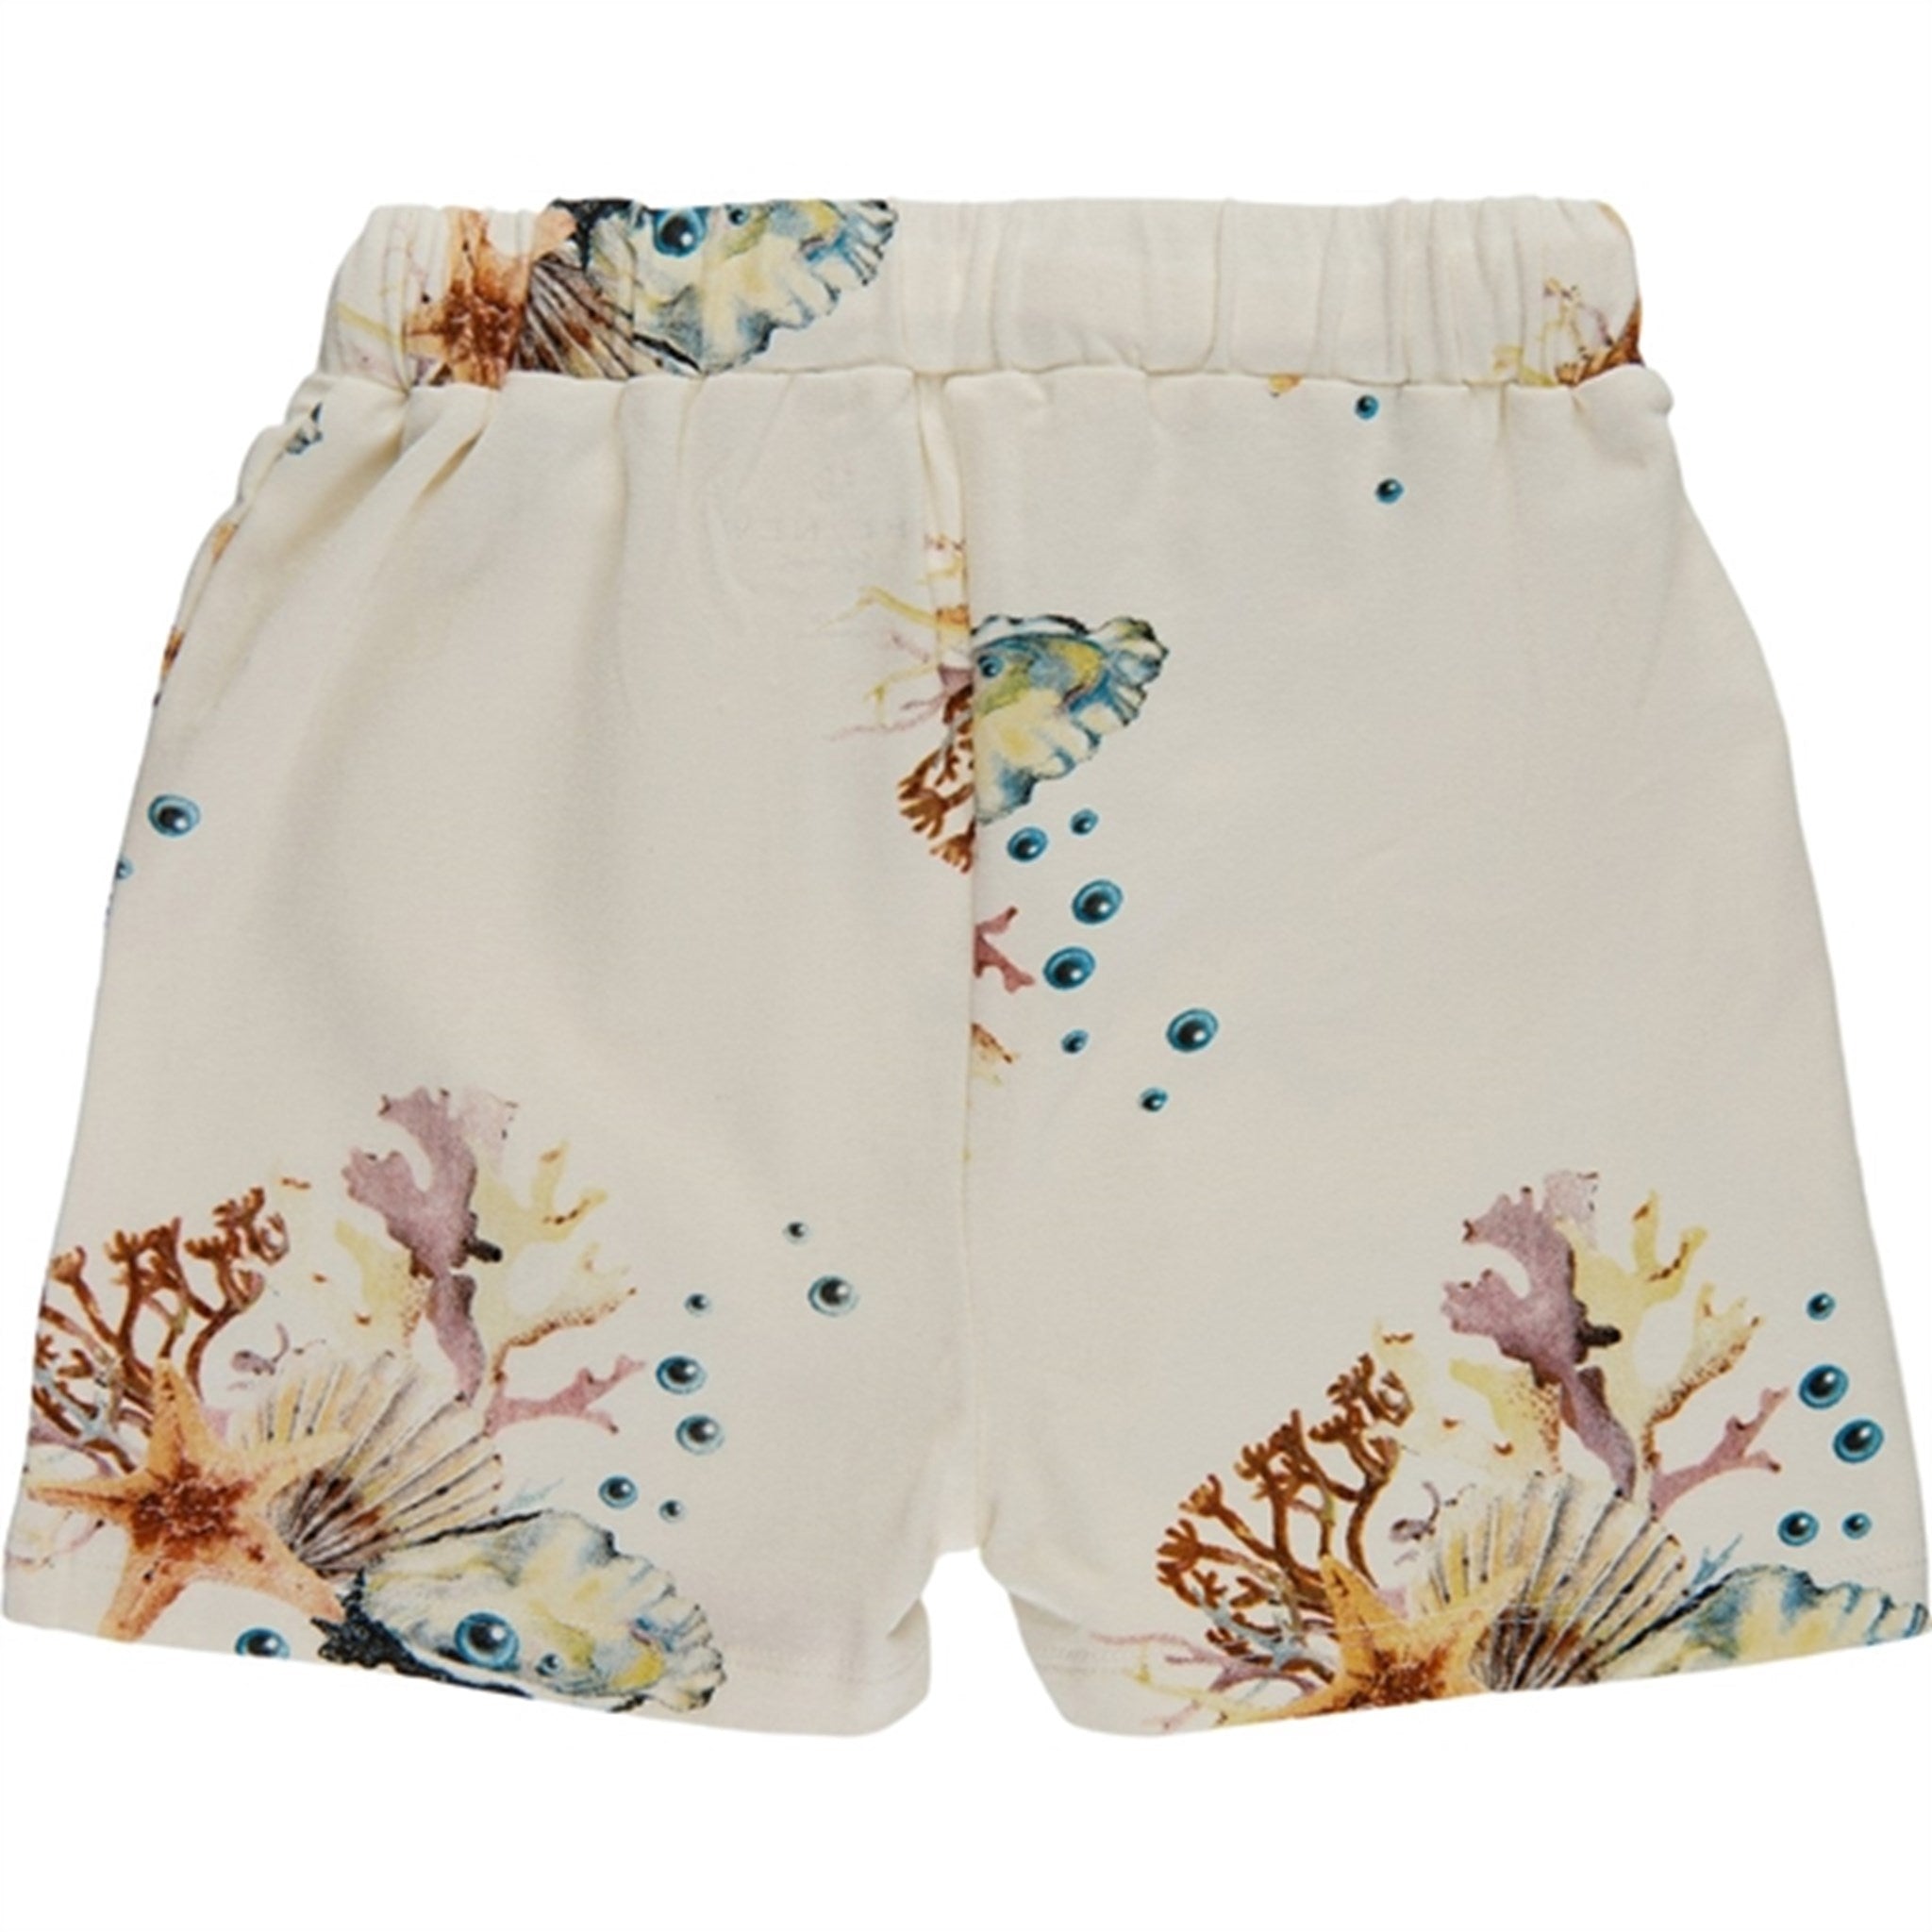 THE NEW Siblings White Swan Coral AOP Gaige Shorts 5